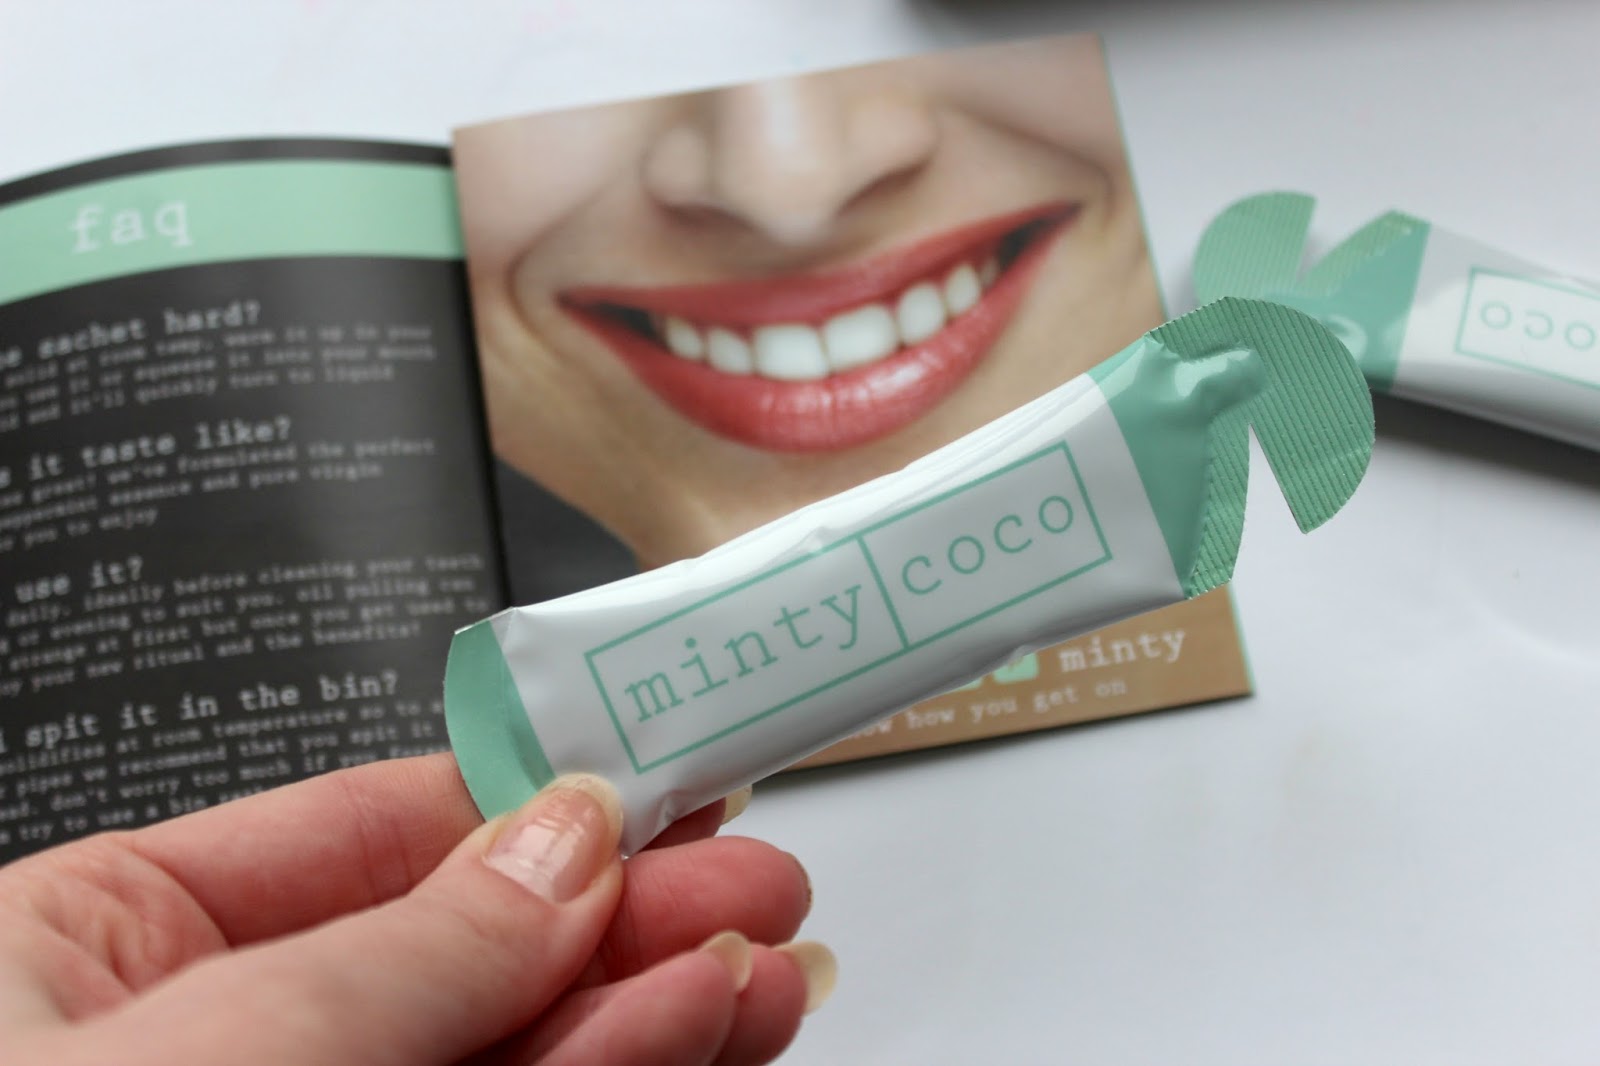 minty-coco-oil-pulling-review